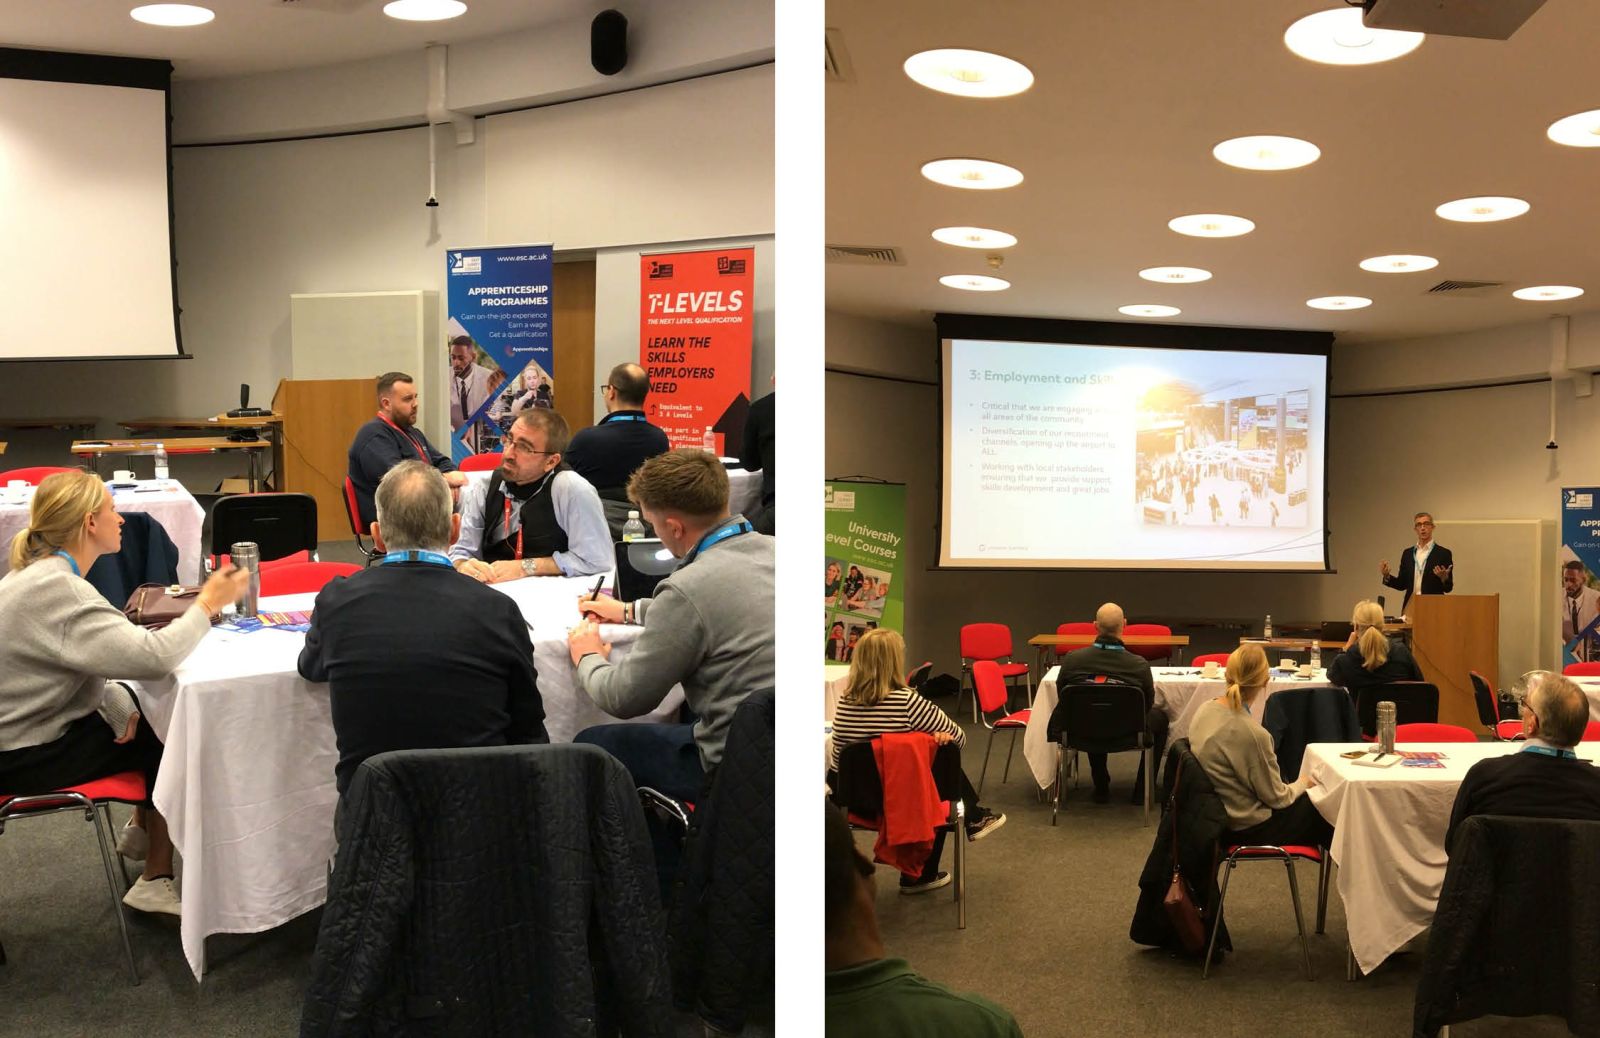 (Left) Tutors networking with employers (Right) Gareth Sear, leading presentation on Gatwick Airport.